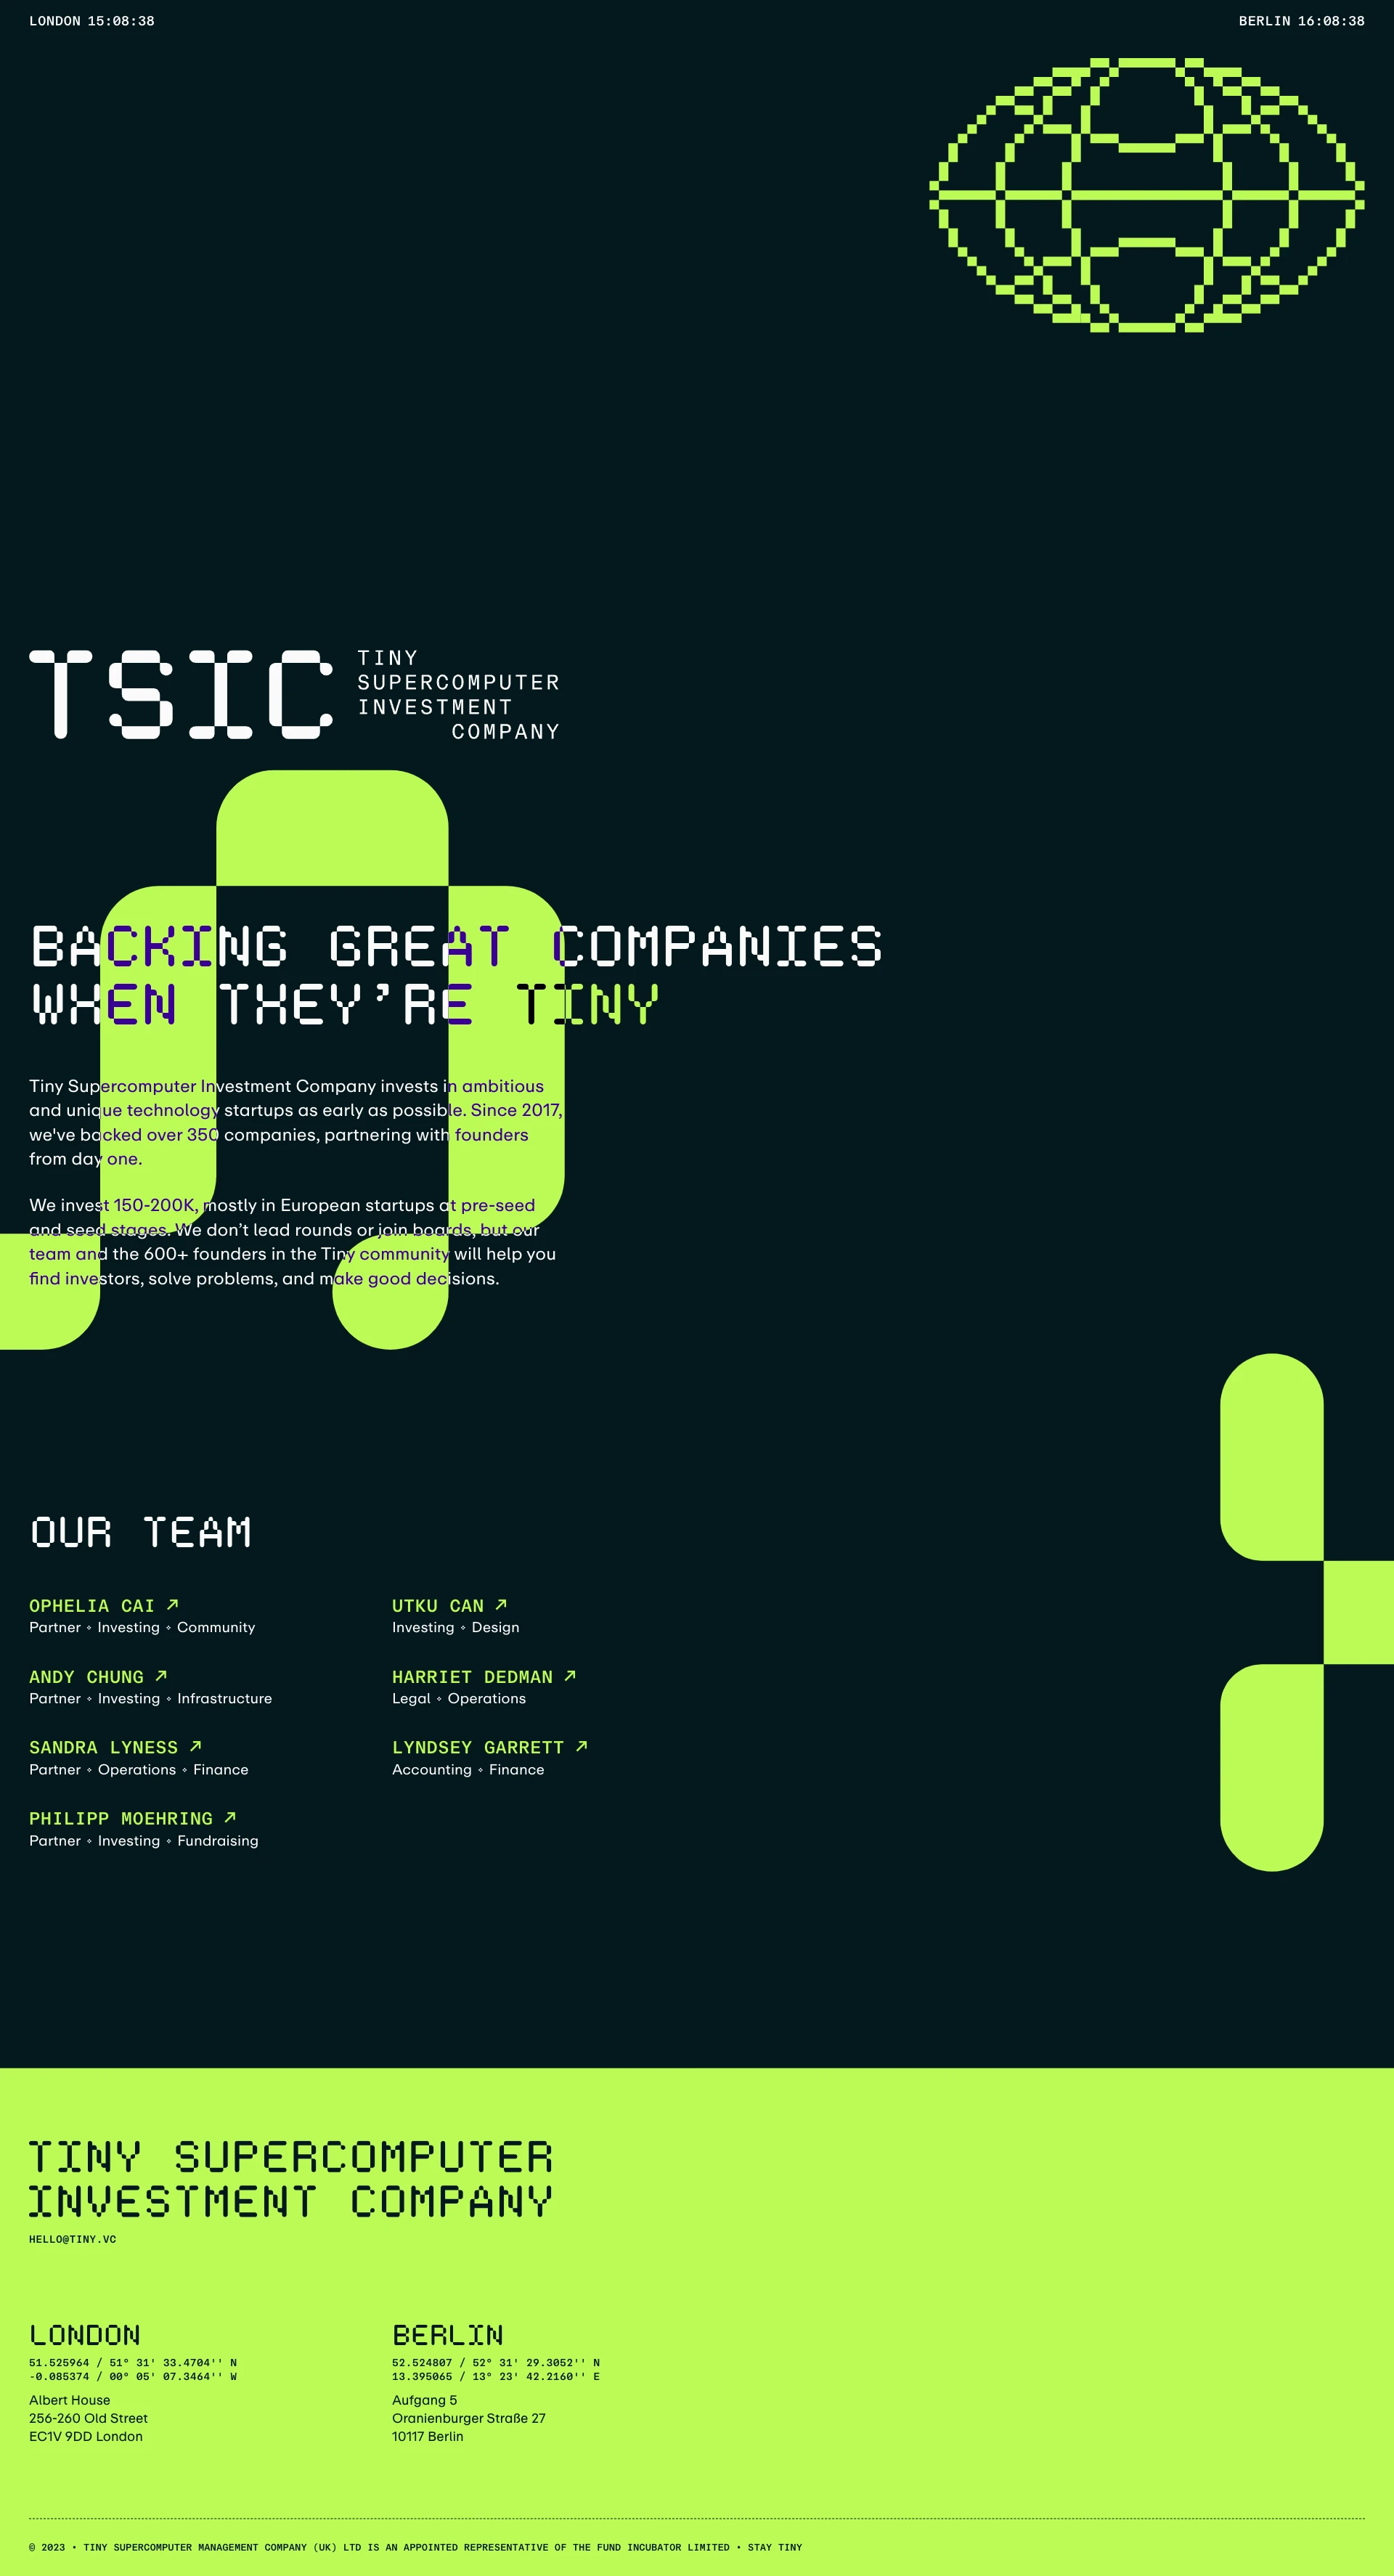 TSIC Landing Page Example: Tiny Supercomputer Investment Company. Backing great companies when they're tiny.